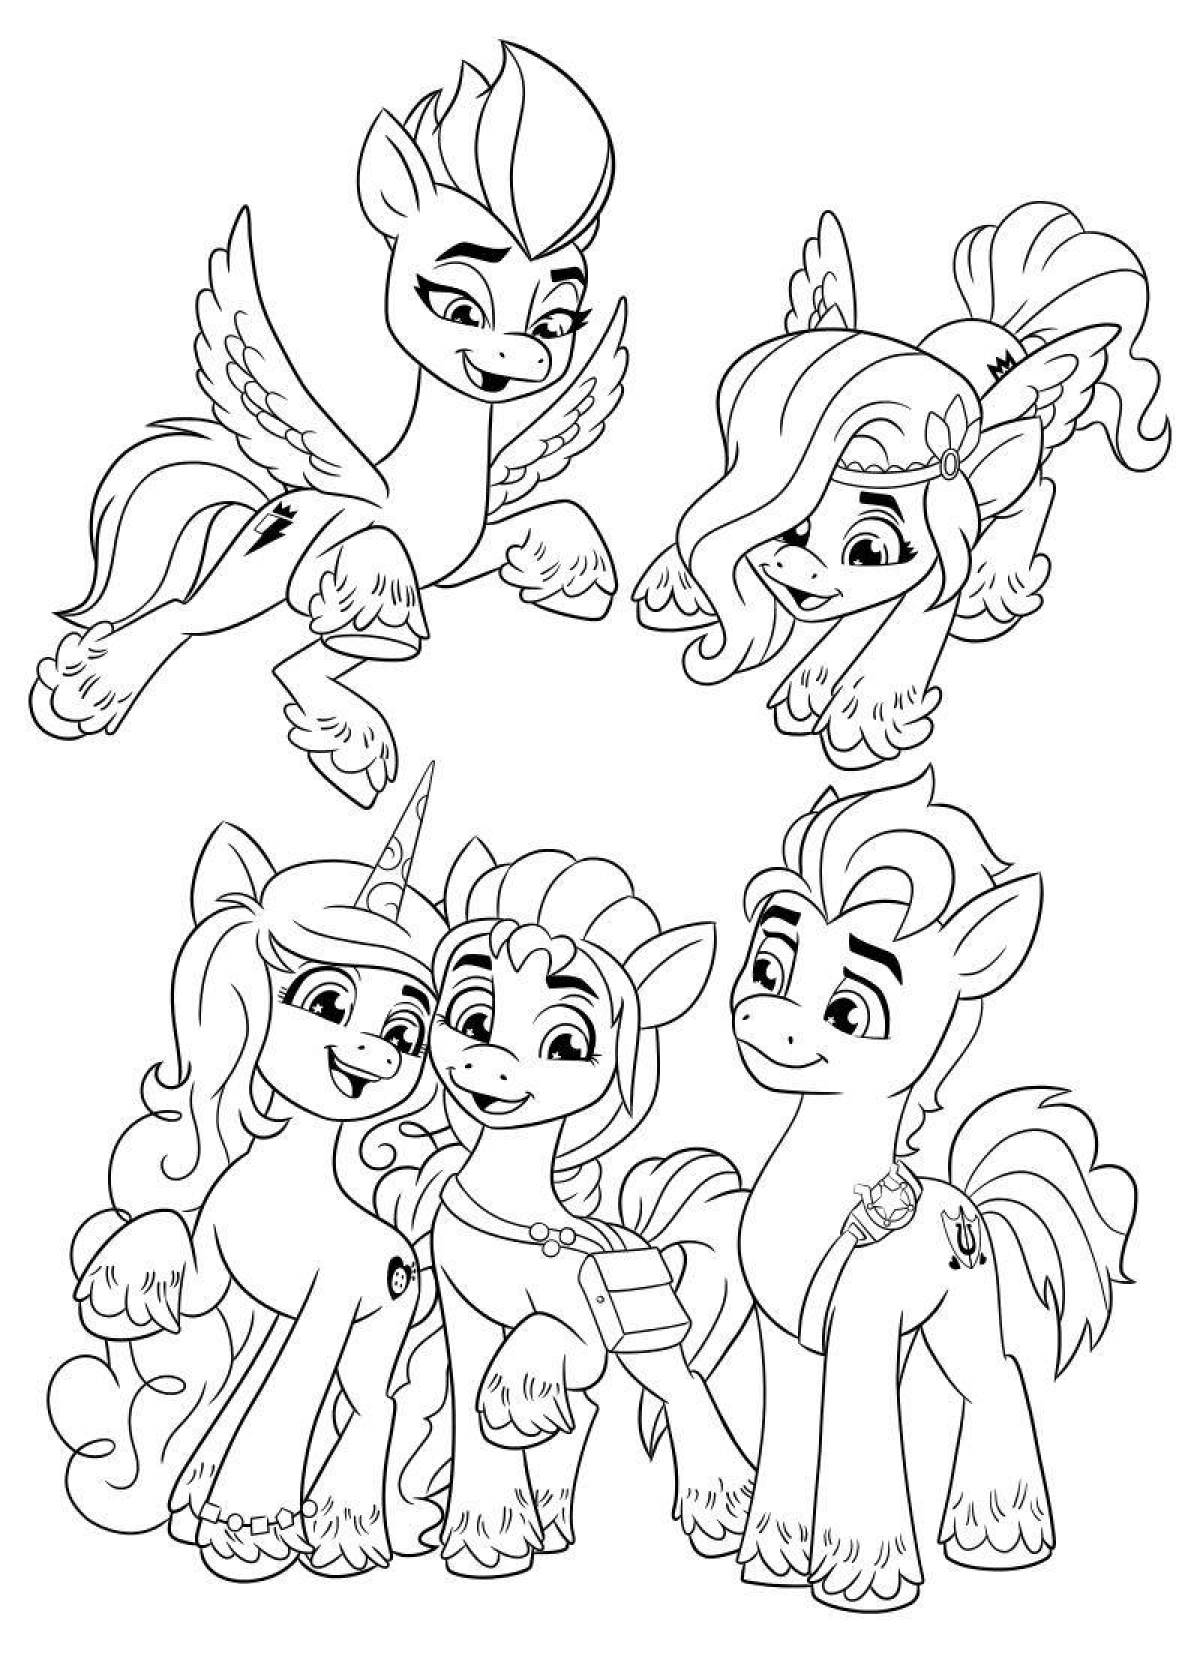 Coloring page energetic pony playtime